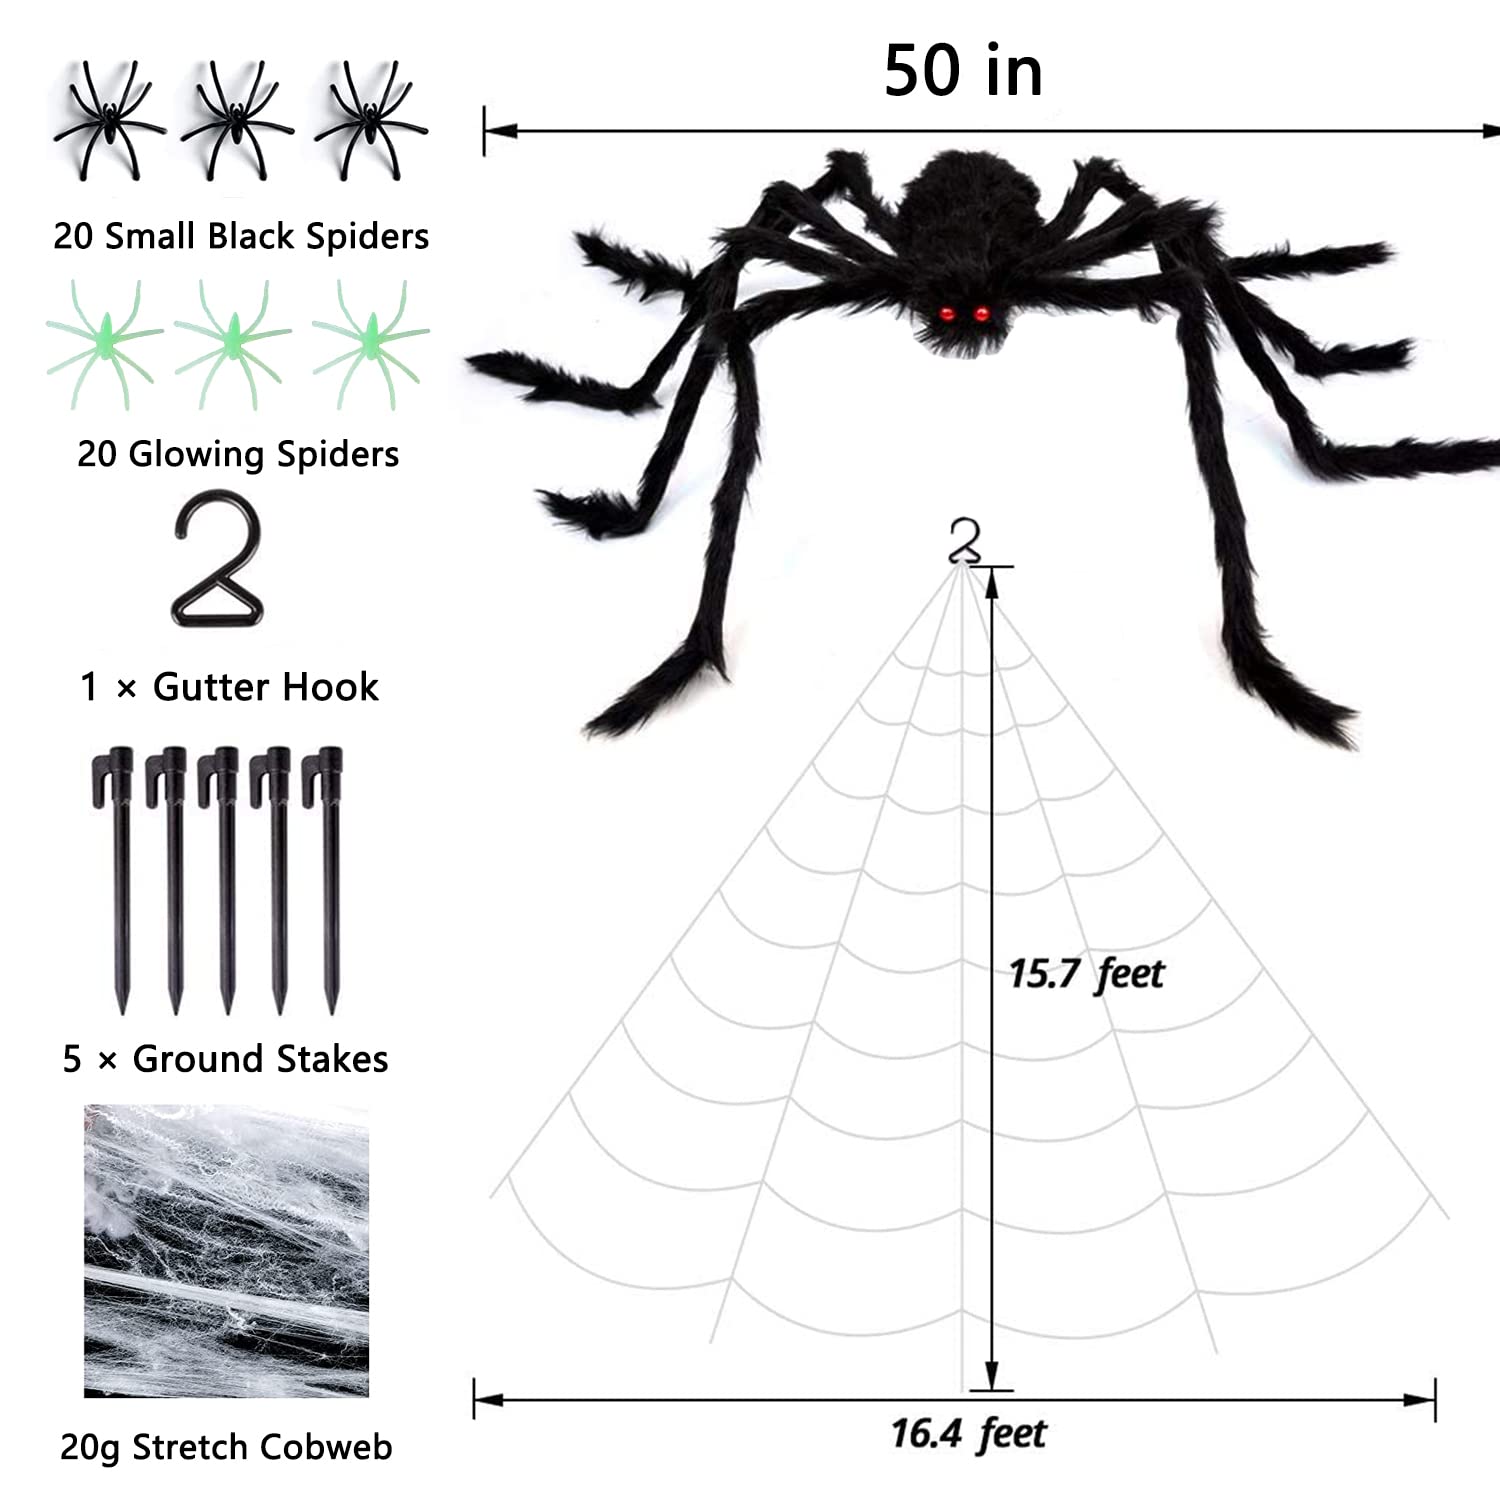 GEDIAO Halloween Spider Decorations 200" Halloween Spider Web + 50" Giant Spider + 40pcs Small Spider for Indoor Outdoor Halloween Decor Yard Party Haunted House Décor